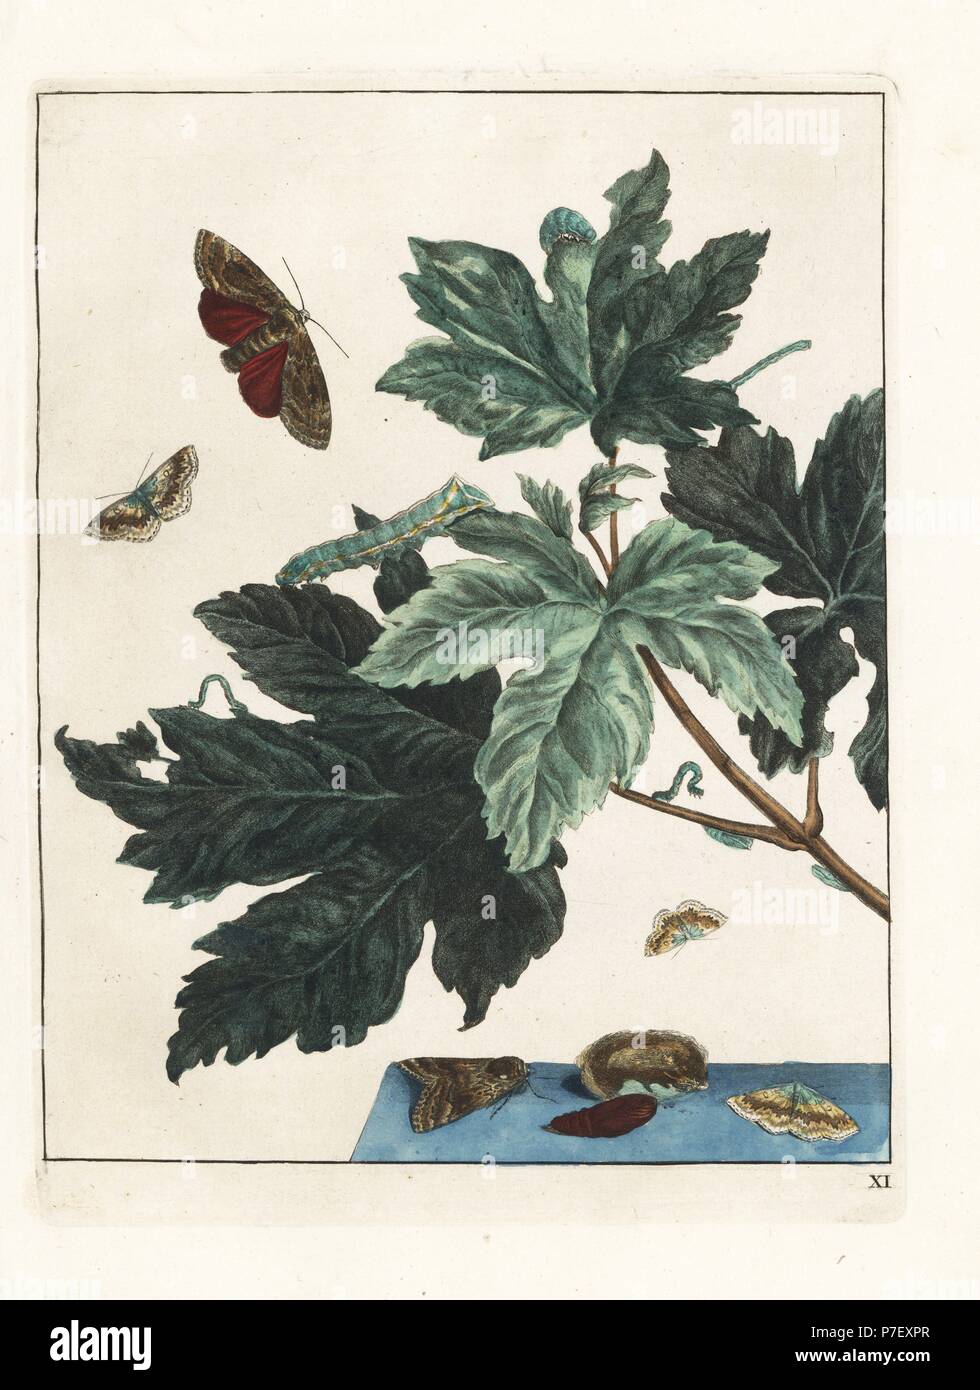 Underwing moth from Meudon, France, and small mocha moth. Handcoloured copperplate engraving drawn and etched by Jacob l'Admiral in Naauwkeurige Waarneemingen omtrent de veranderingen van veele Insekten (Accurate Descriptions of the Metamorphoses of Insects), J. Sluyter, Amsterdam, 1774. For this second edition, M. Houttuyn added another eight plates to the original 25. Stock Photo